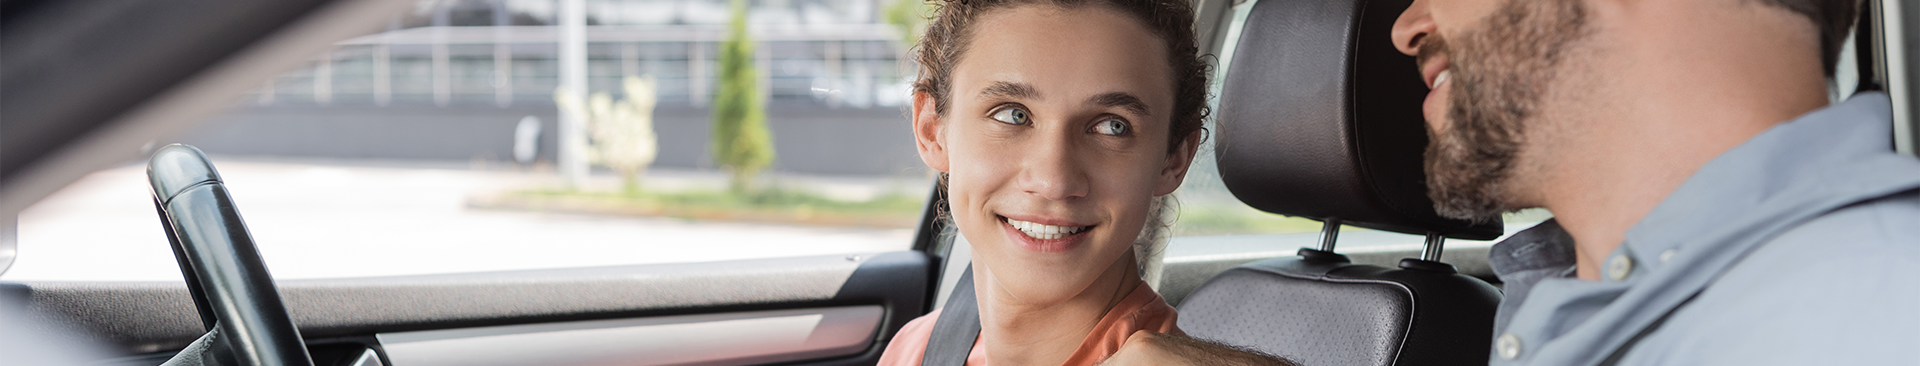 Essential Safe Driving Tips for Teens banner